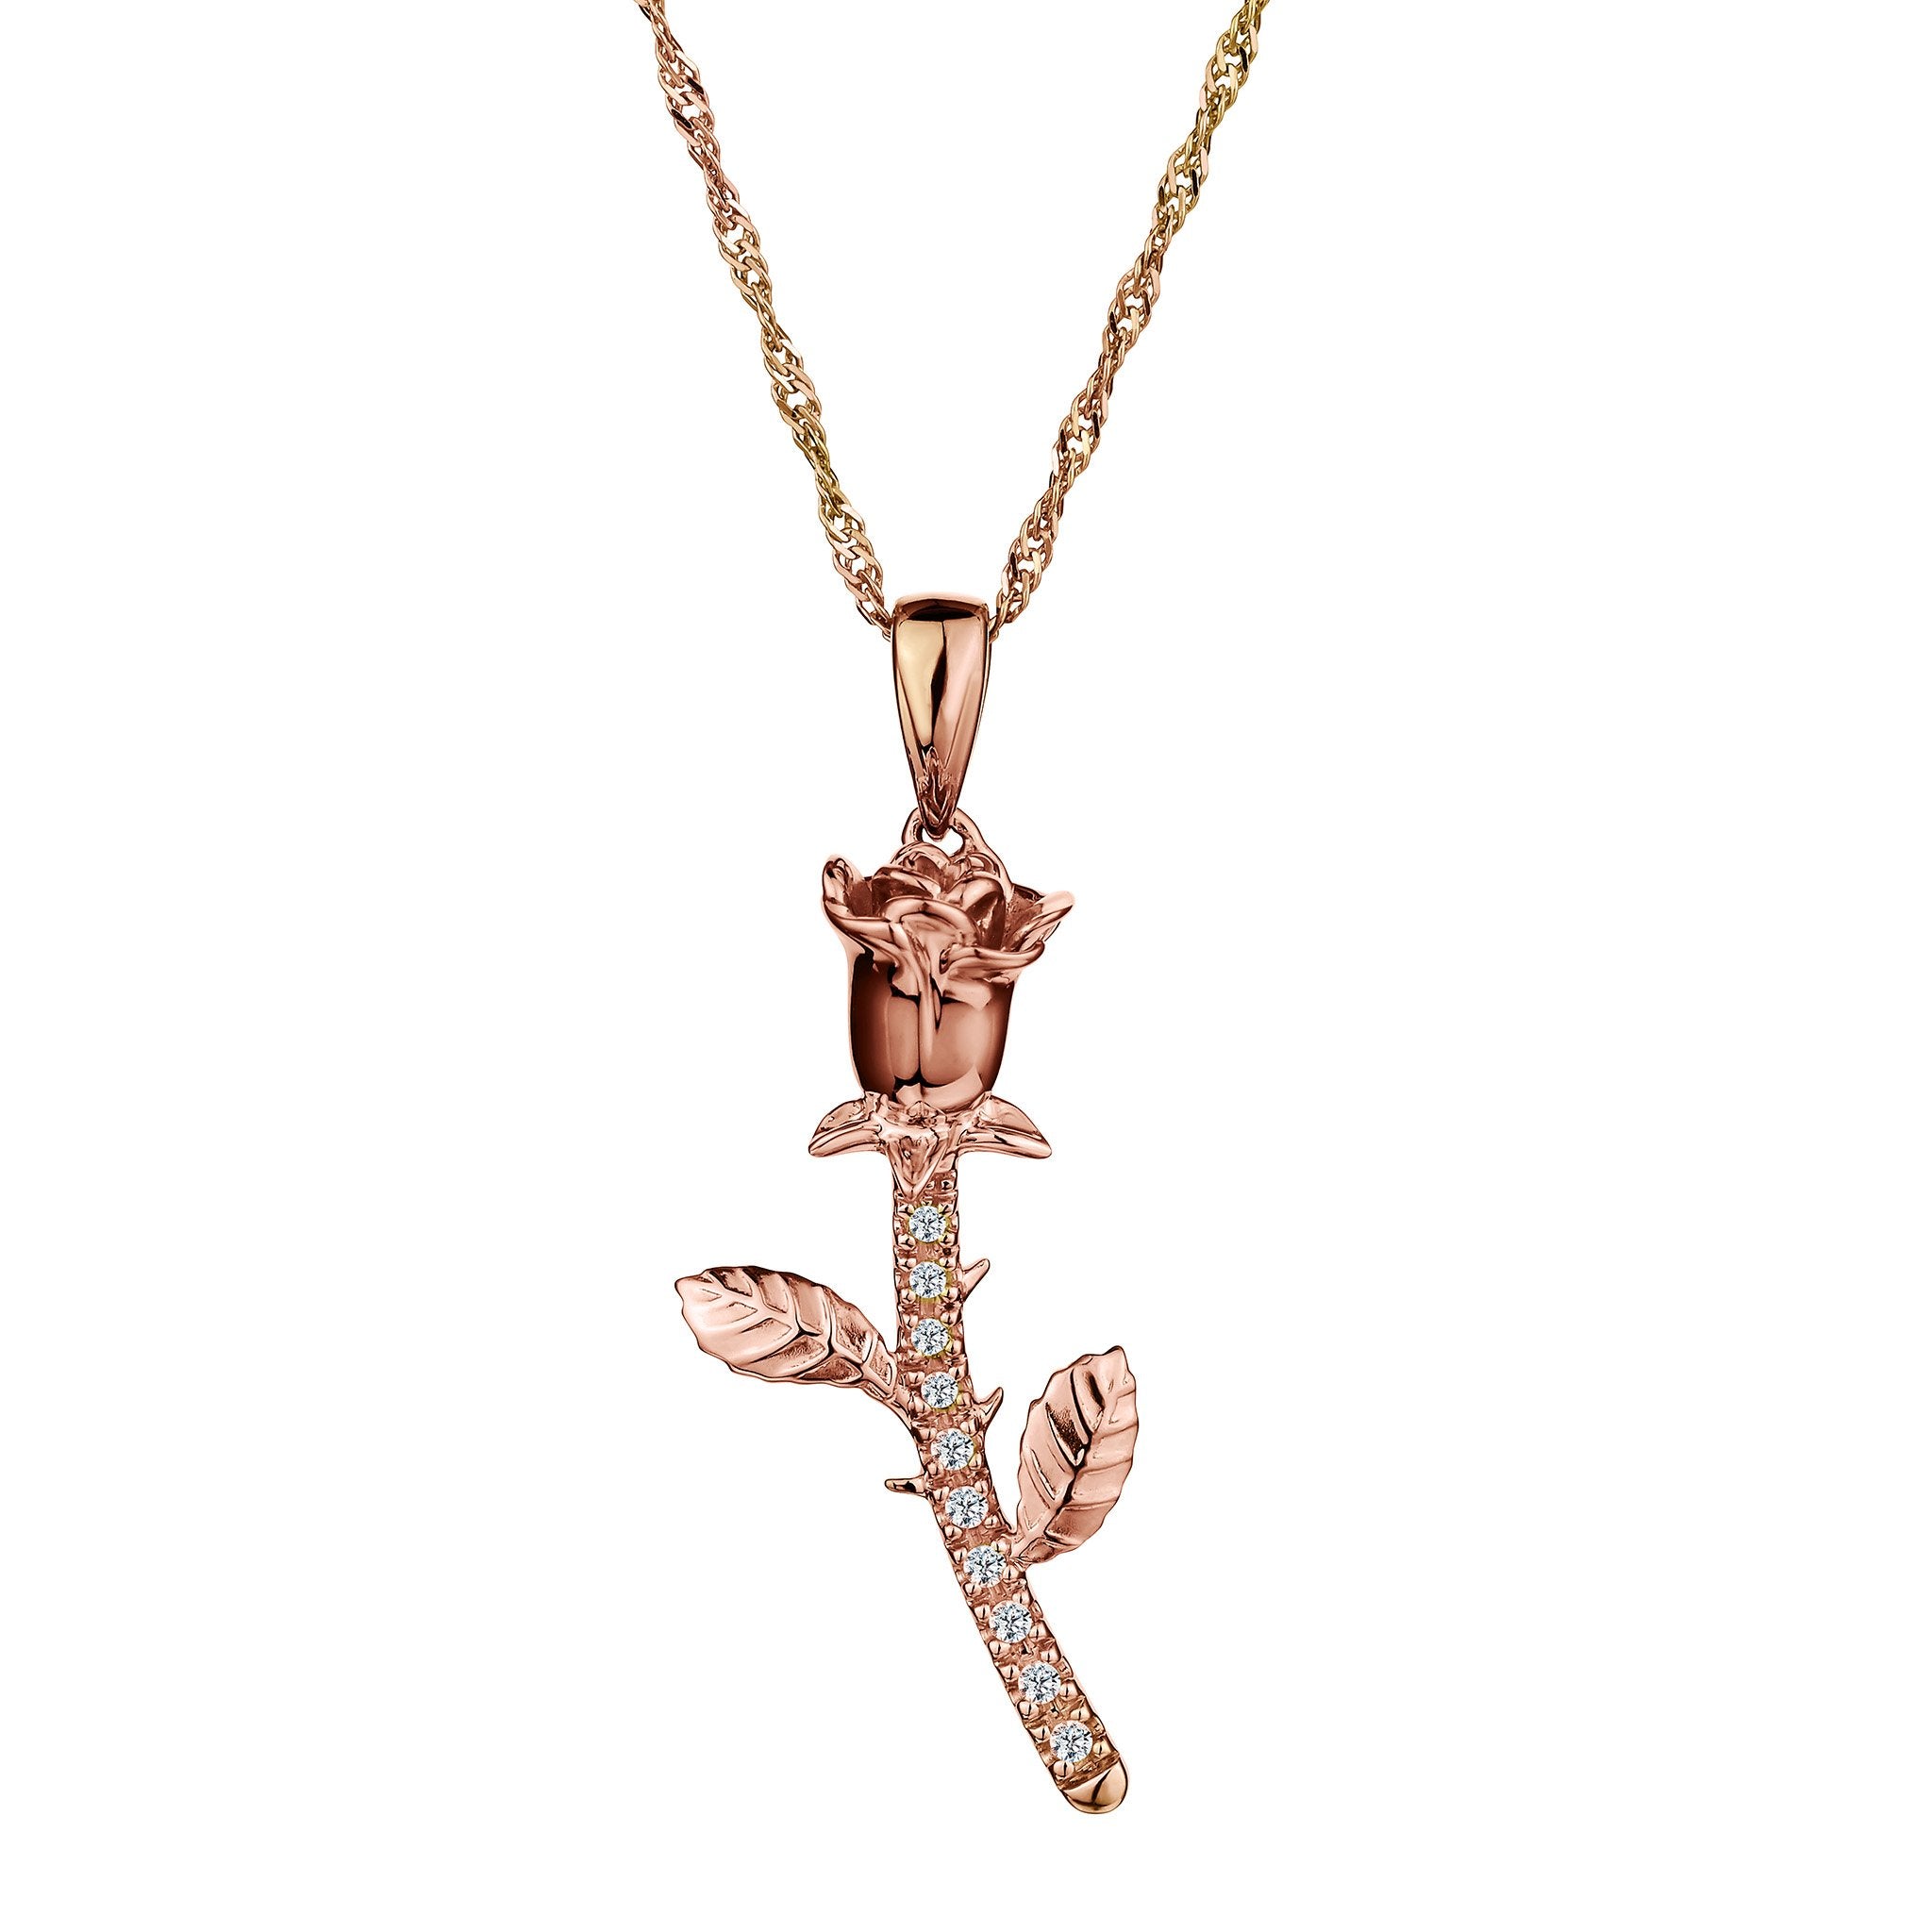 .05 CARAT DIAMOND "ROSE" PENDANT, 10kt ROSE GOLD, WITH 10kt ROSE GOLD CHAIN.....................NOW